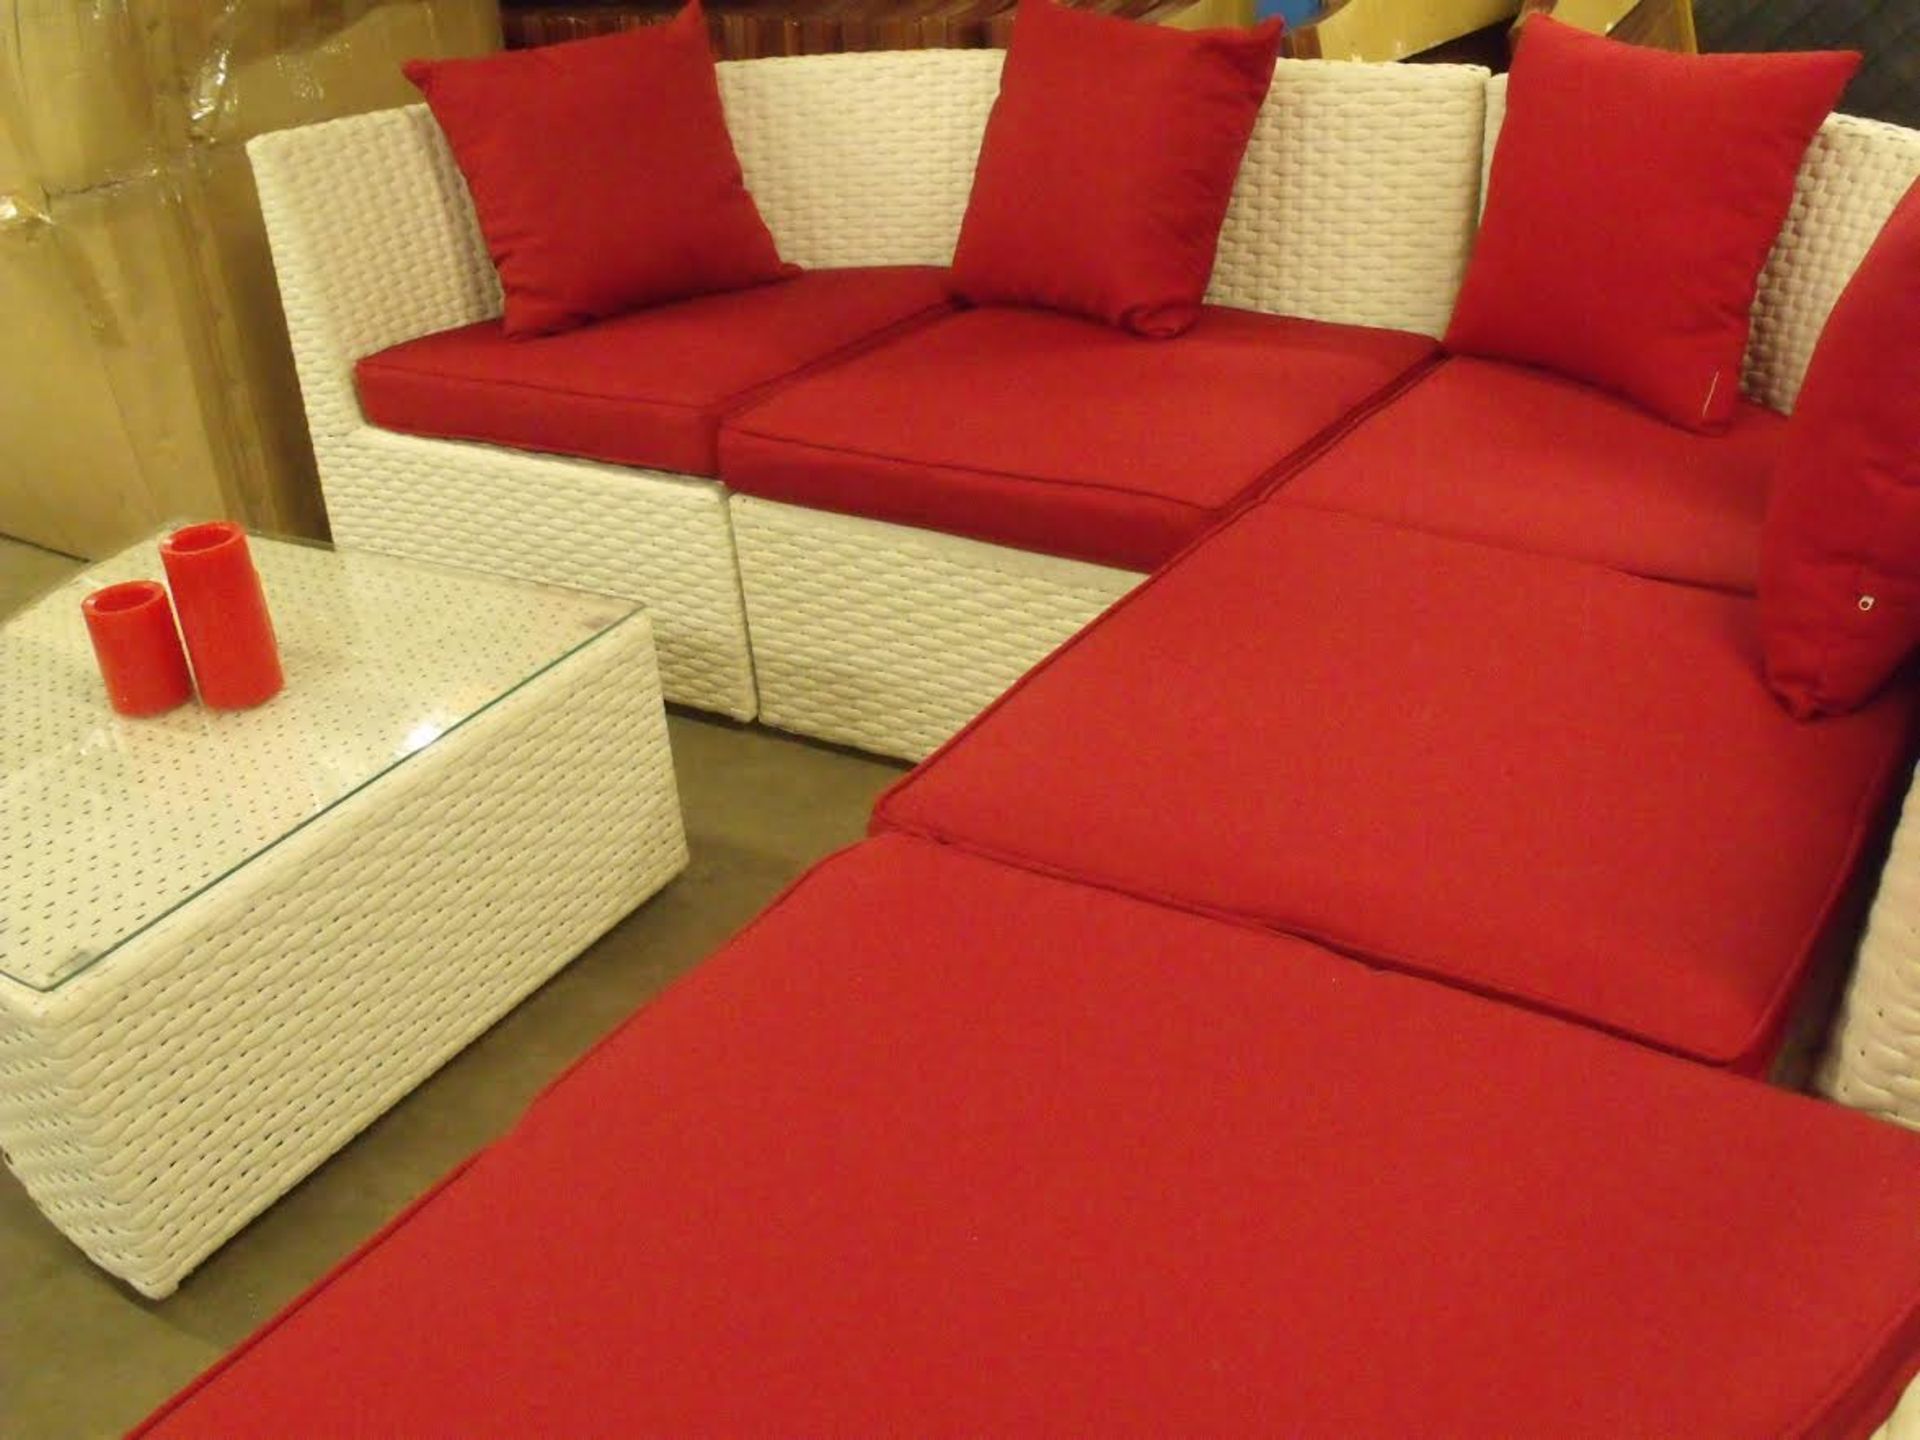 Paphos 6 piece All Weather Rattan Corner Sofa Set Aluminium frame white in colour with Red throw